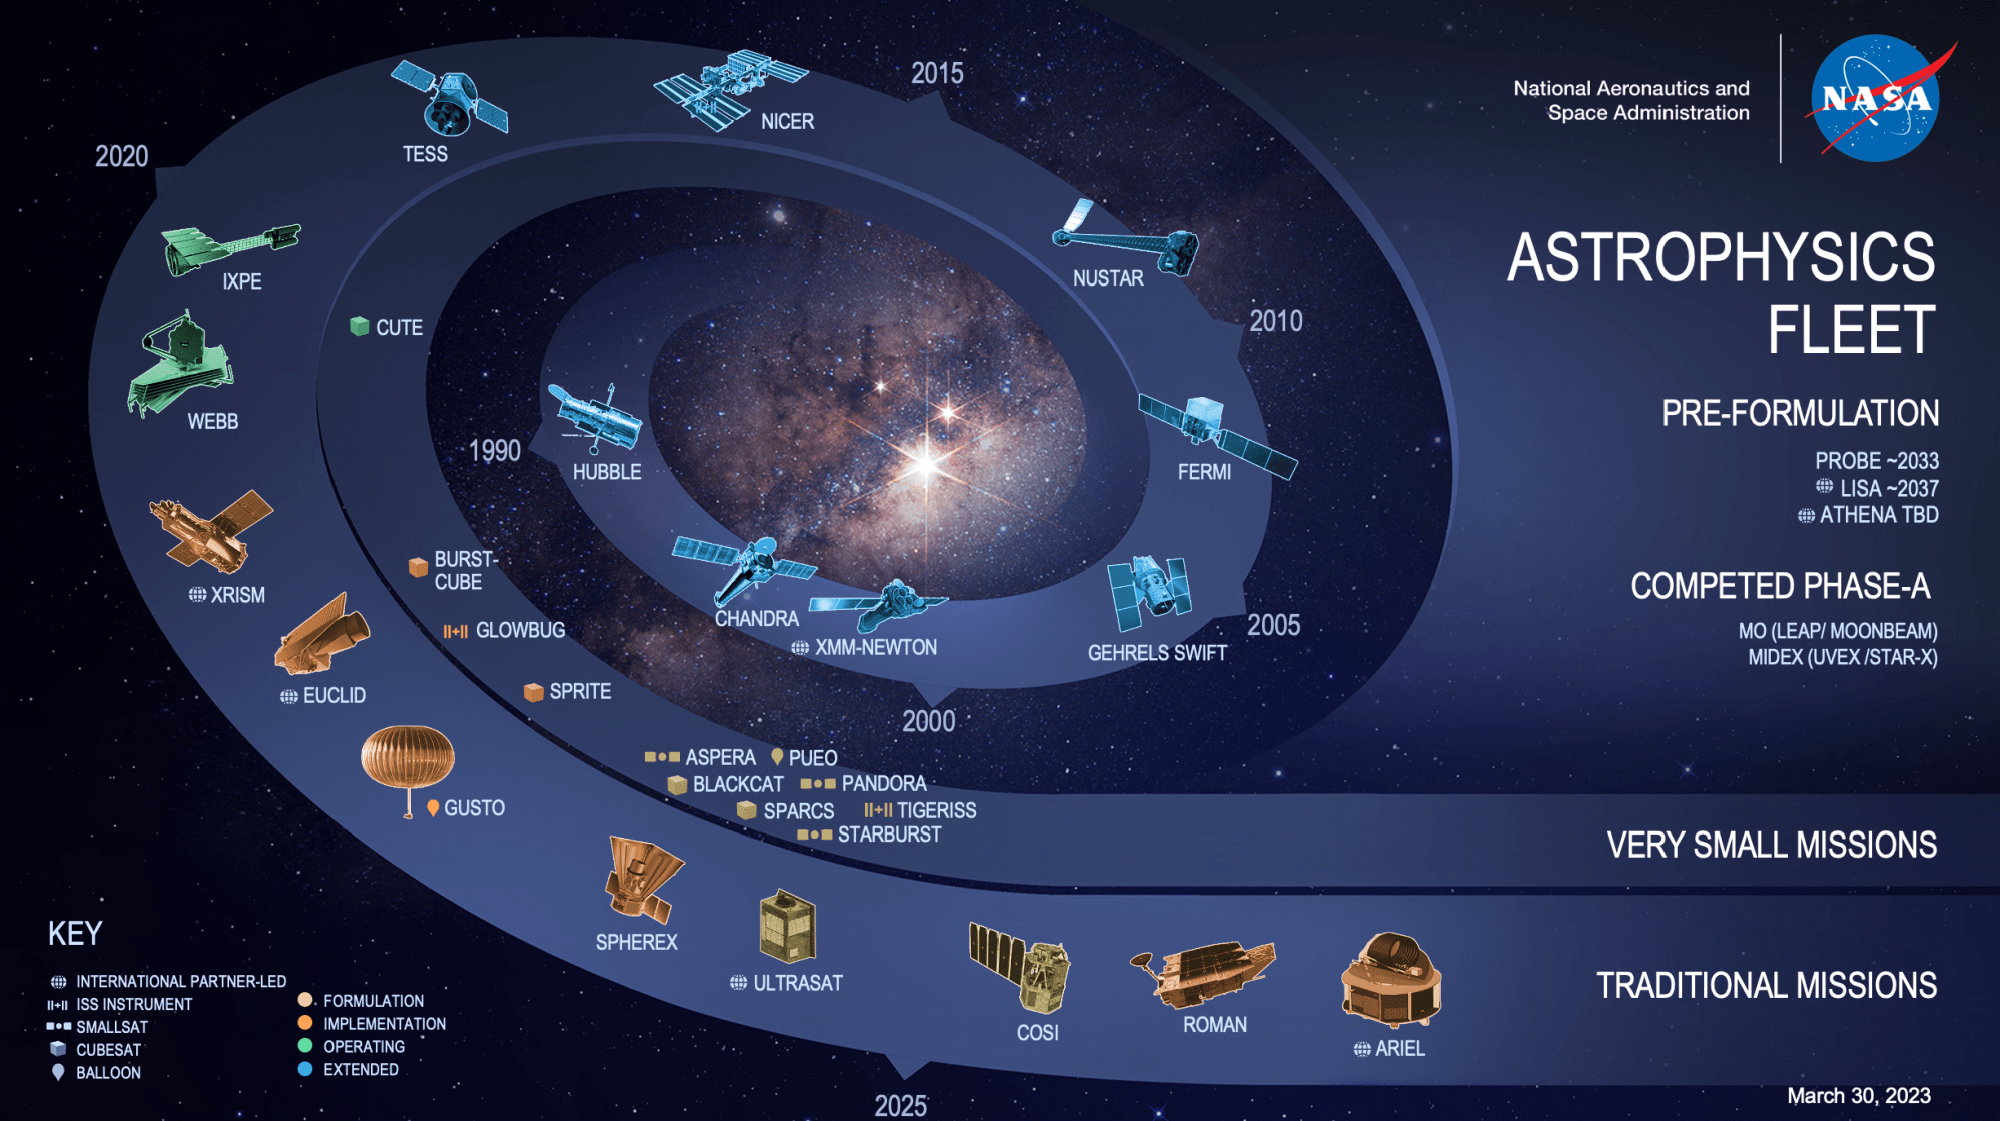 An infographic displaying the spacecraft that make up the Astrophysics fleet of current missions.